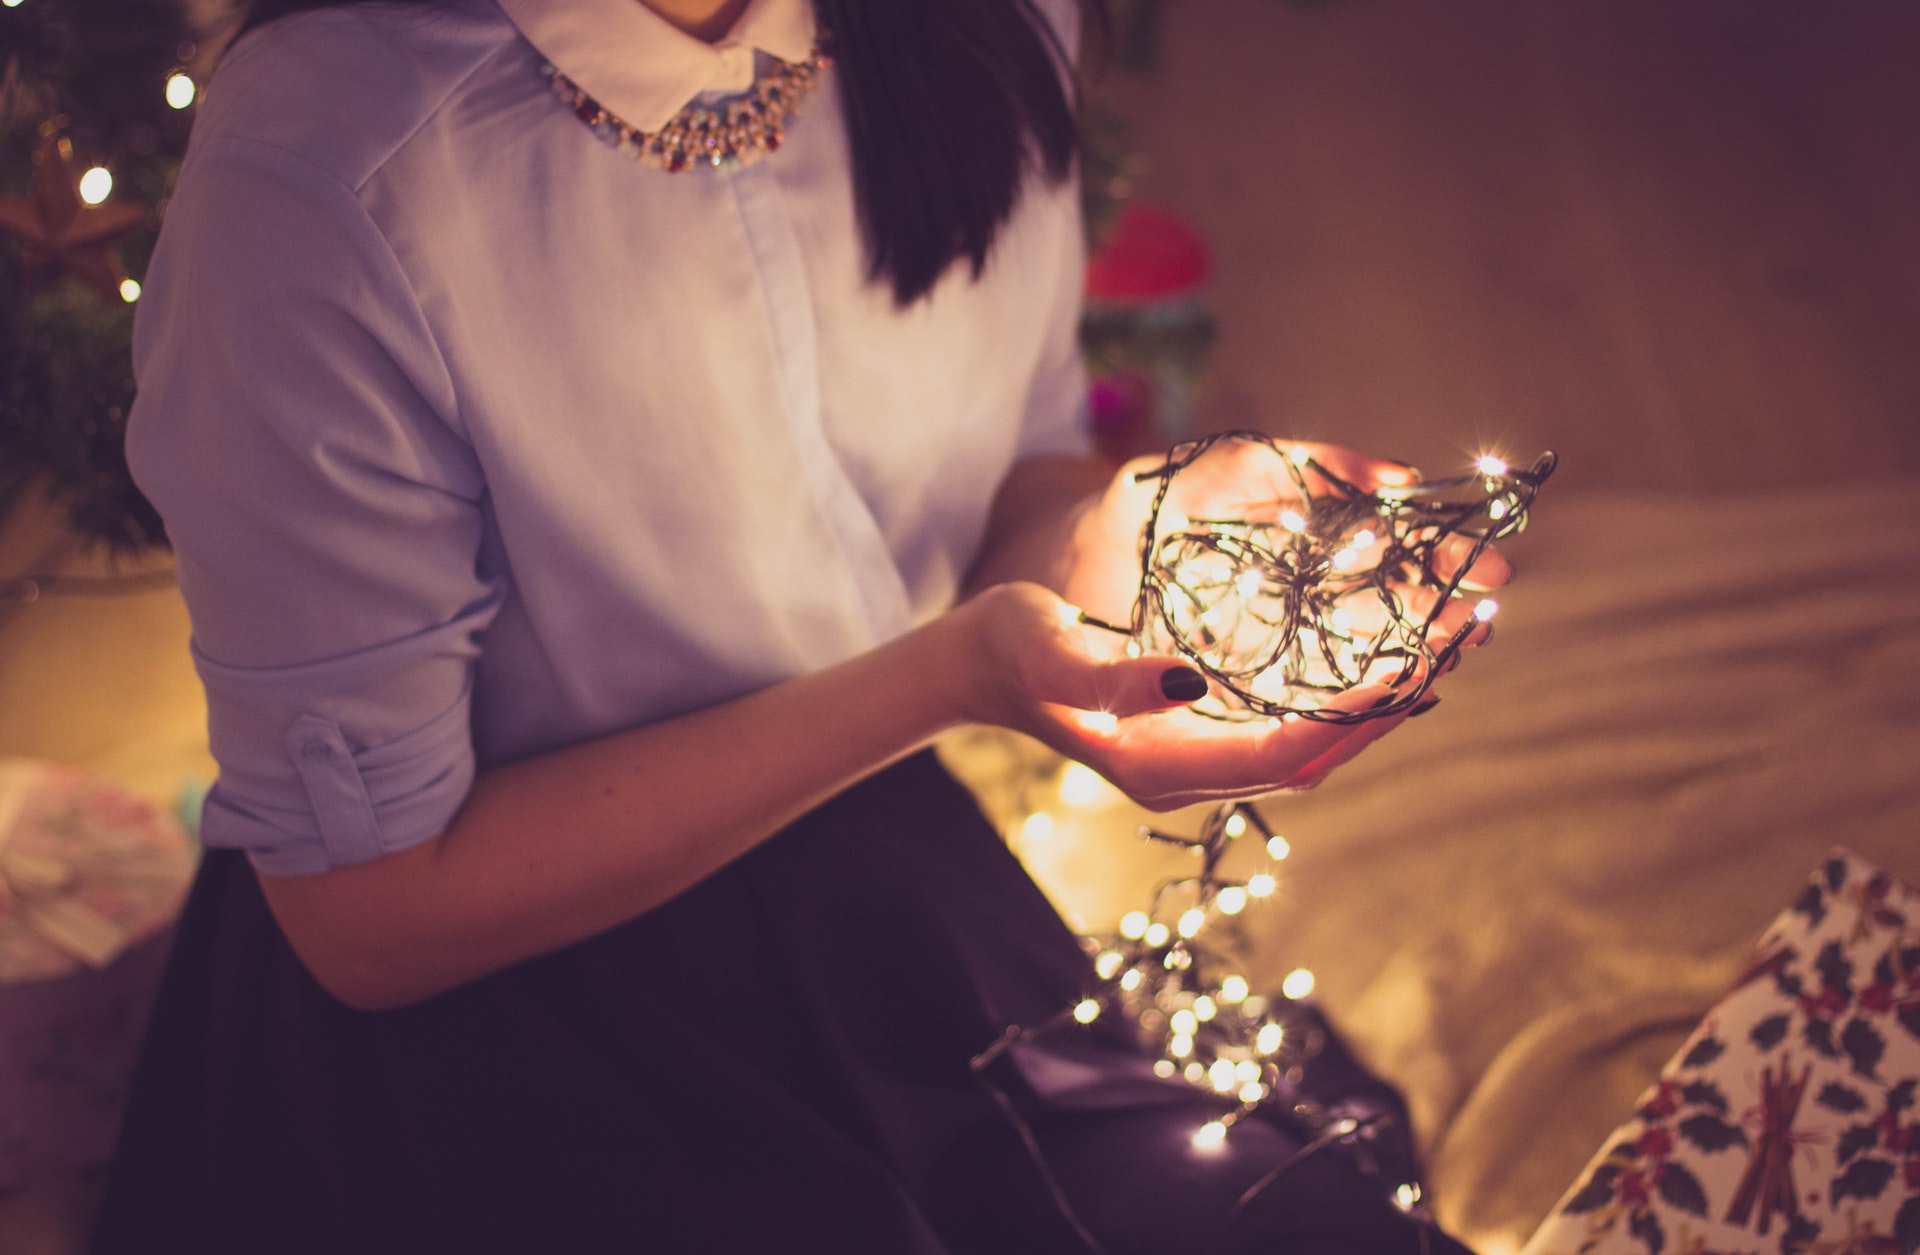 Finding balance for your mental health during the holidays